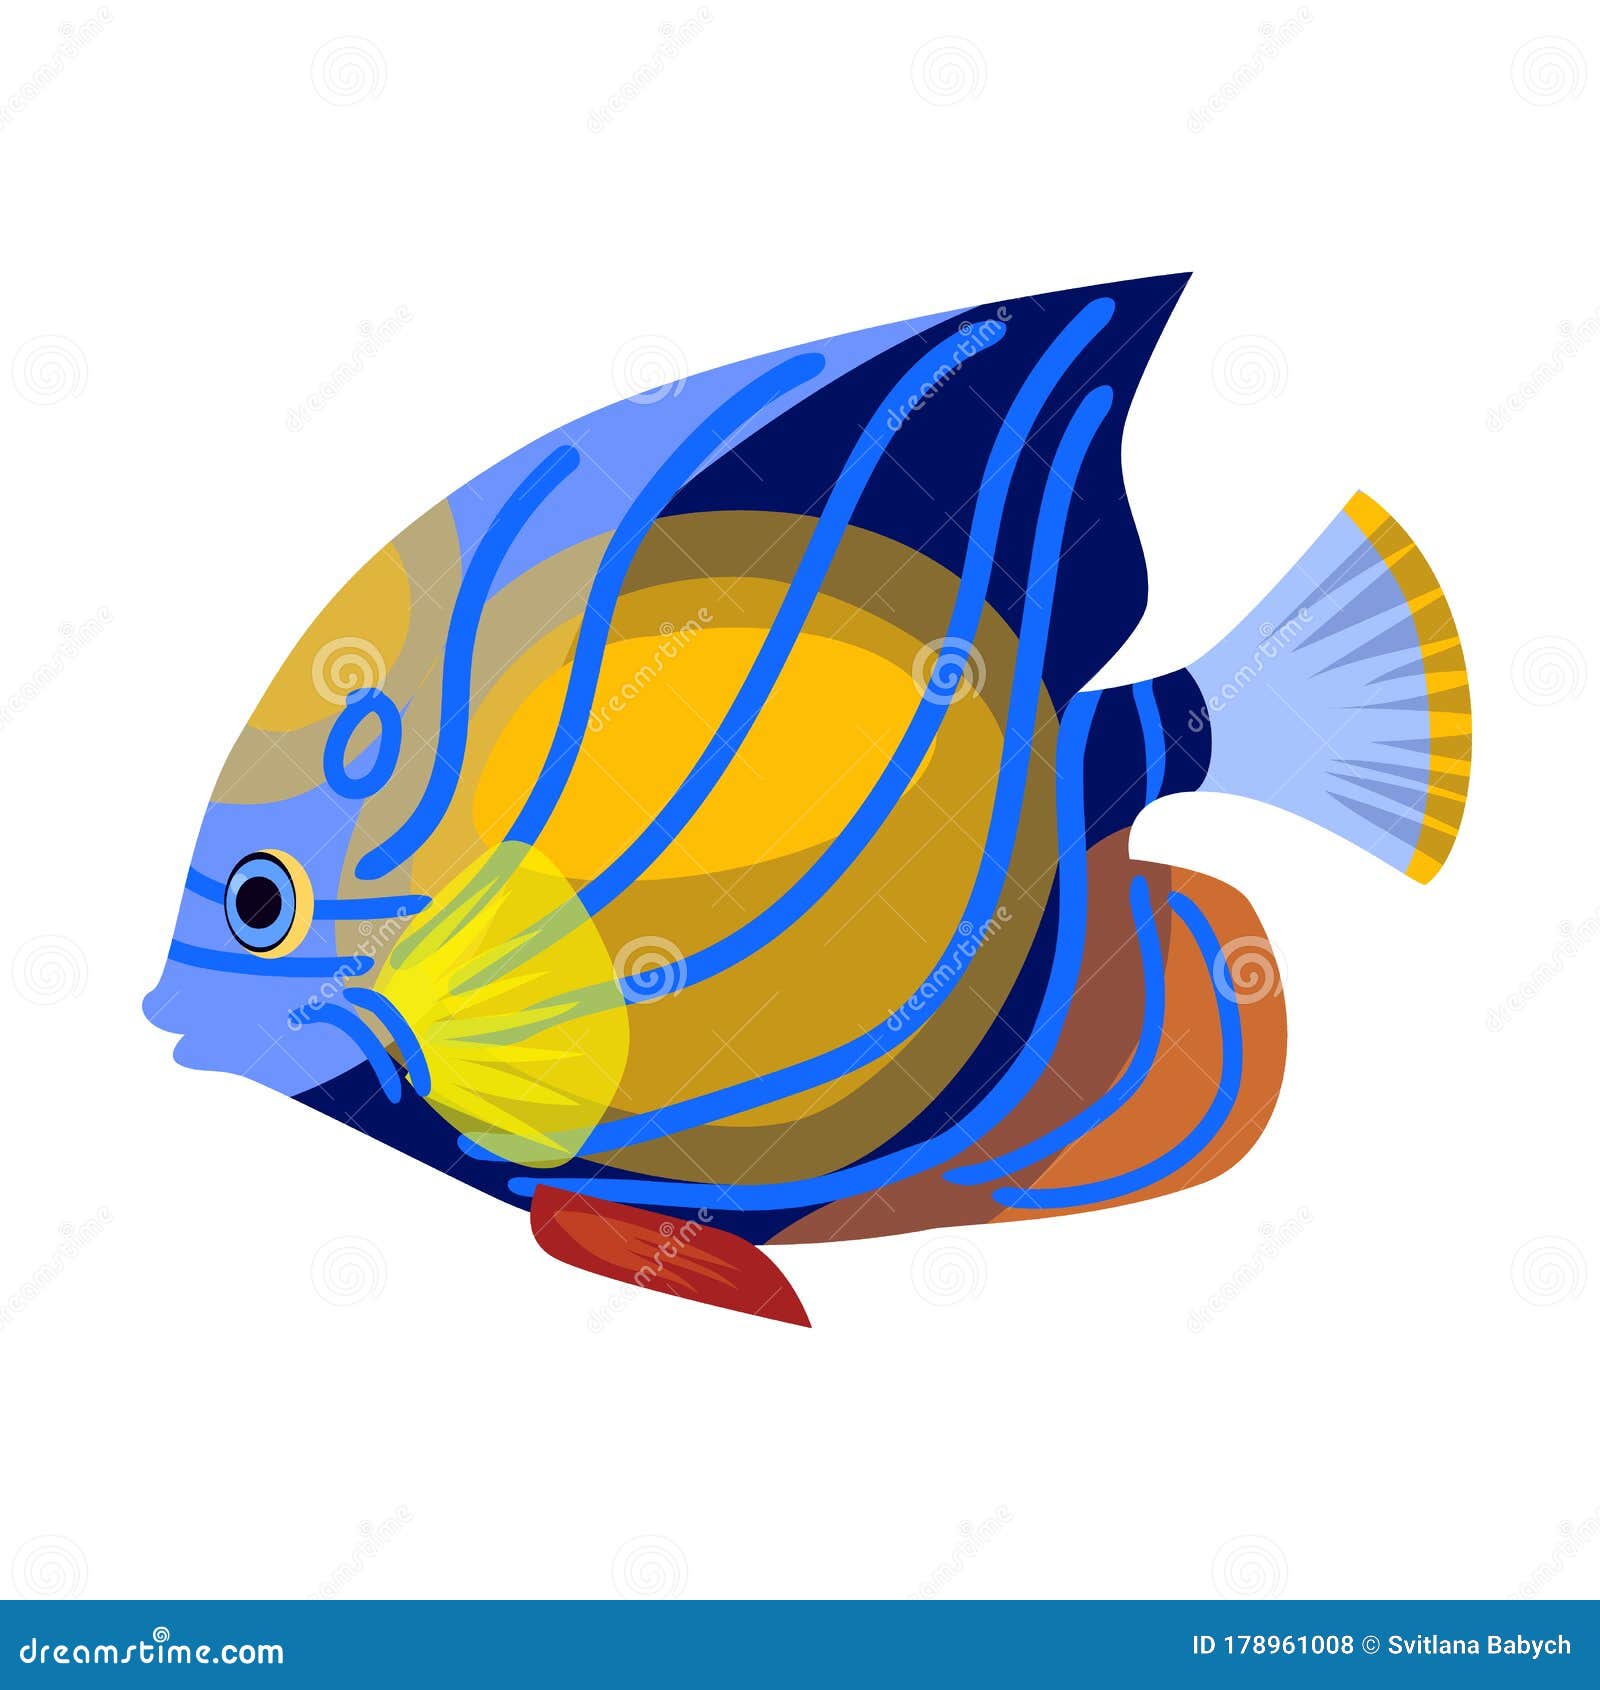 Tropical Fish Vector  Vector Icon Isolated on White Background Tropical  Fish. Stock Vector - Illustration of reef, animals: 178961008